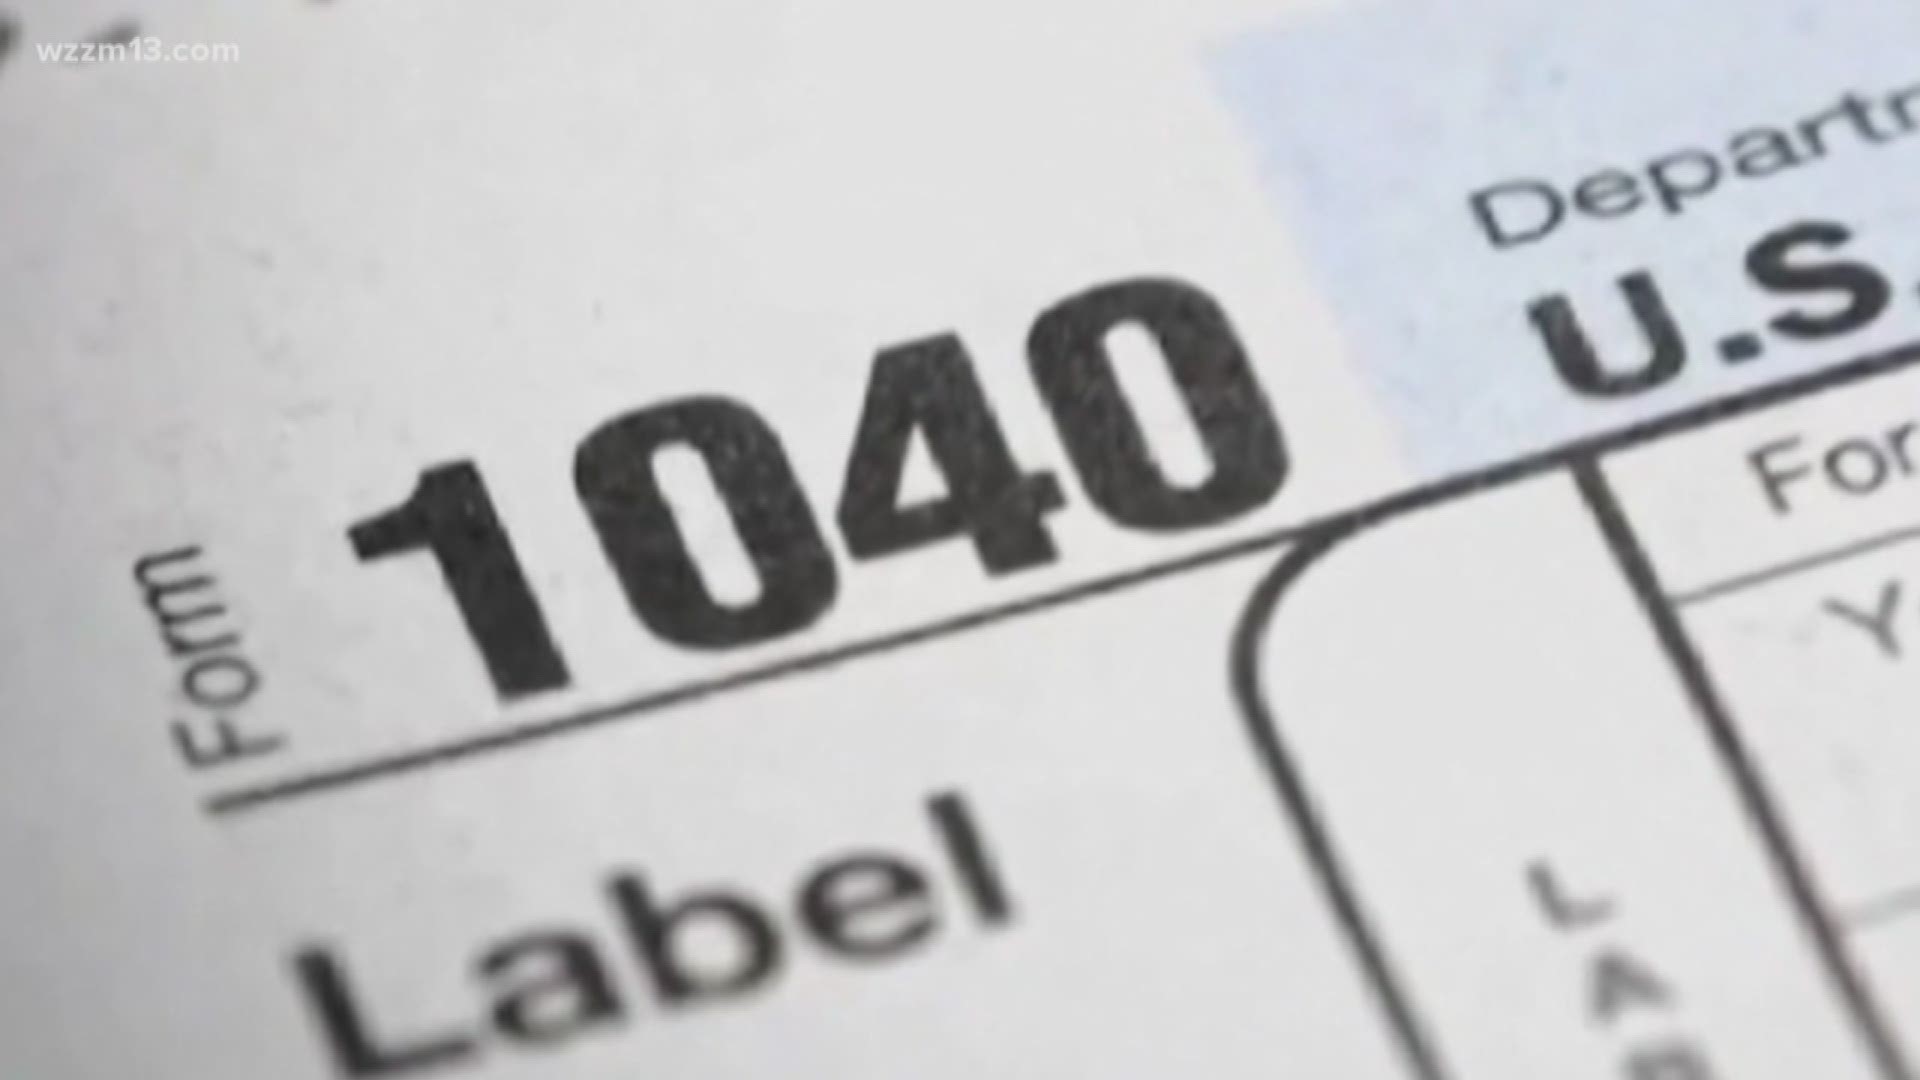 Each year, Tax Day happens on April 15 but for some -- there are surprises that creep up.